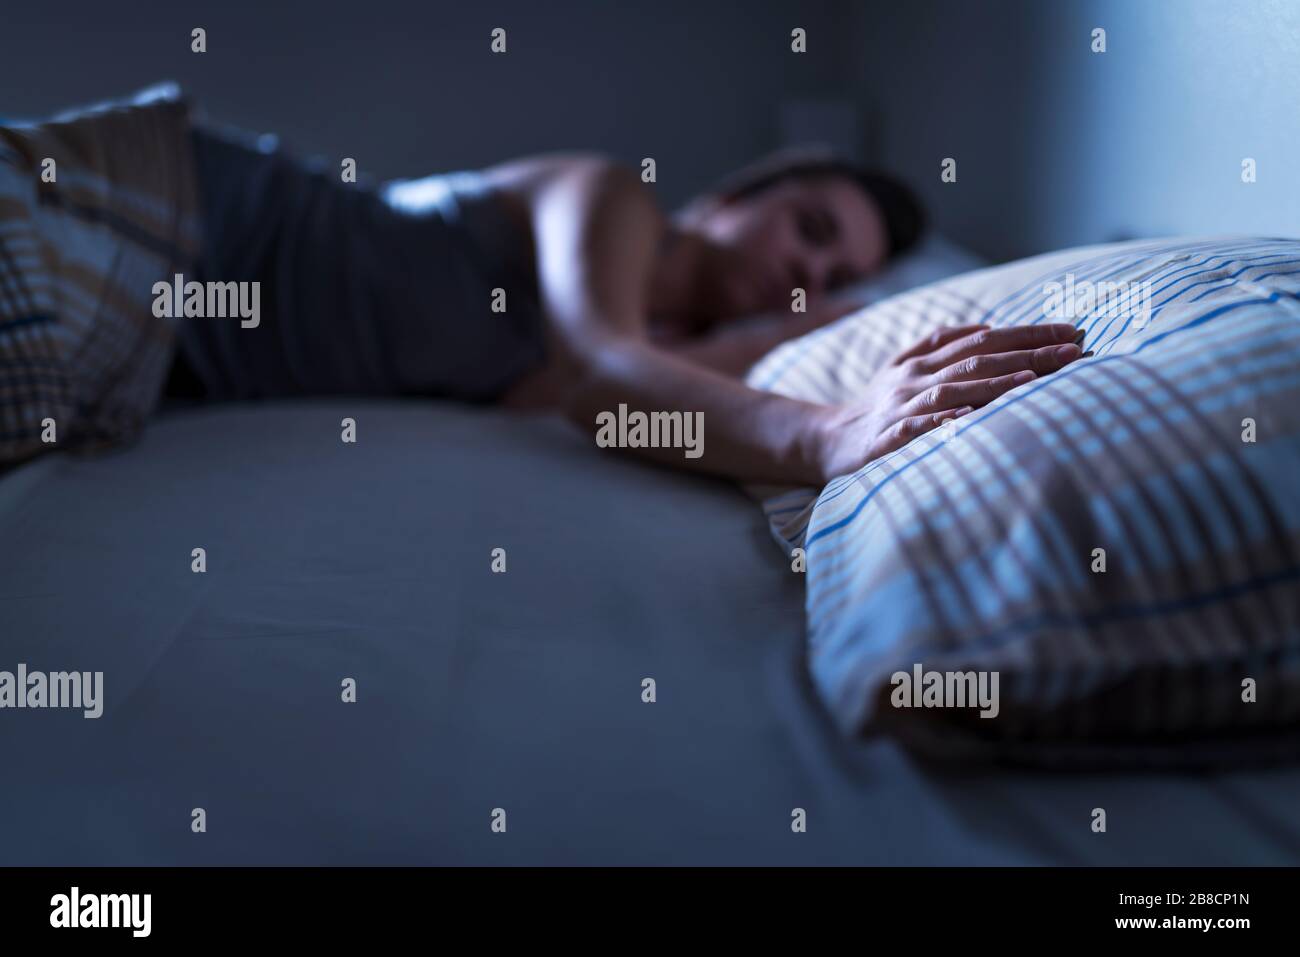 Single woman sleeping alone in bed at home. Lonely lady missing husband or boyfriend. Hand on pillow. Solitude, infidelity or heartbreak concept. Stock Photo